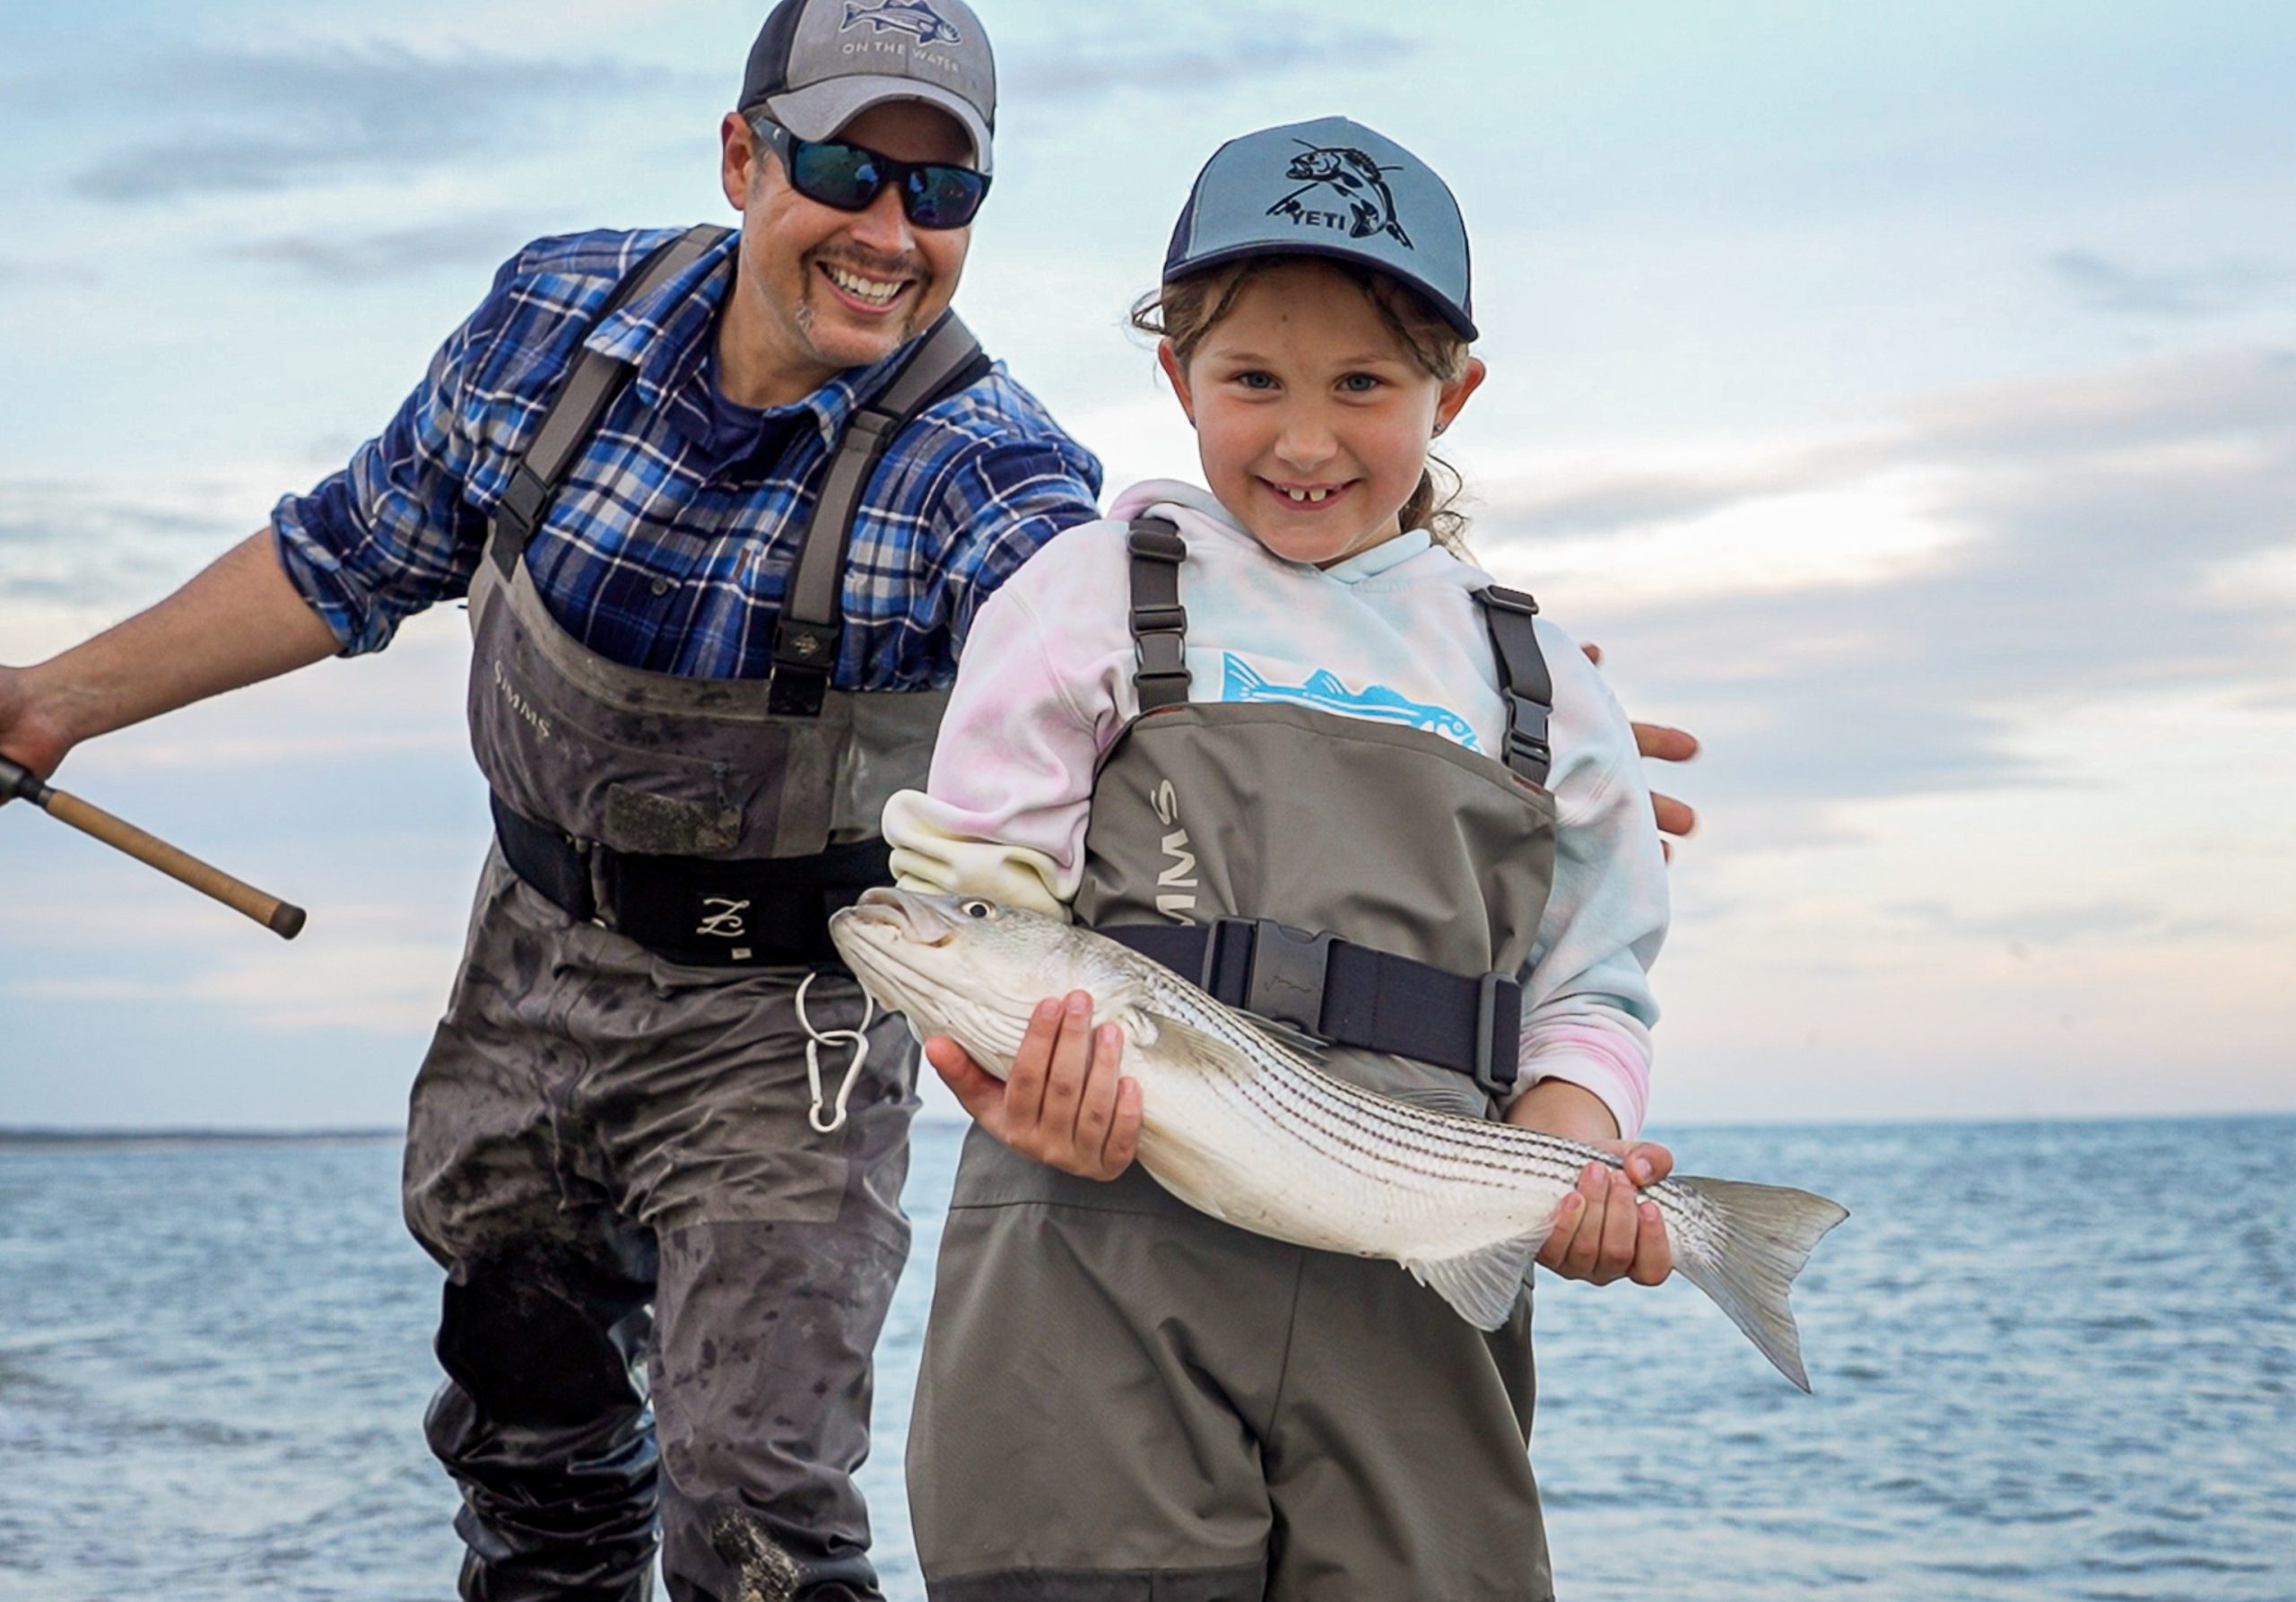 8 Gifts for the Fishing Family - On The Water